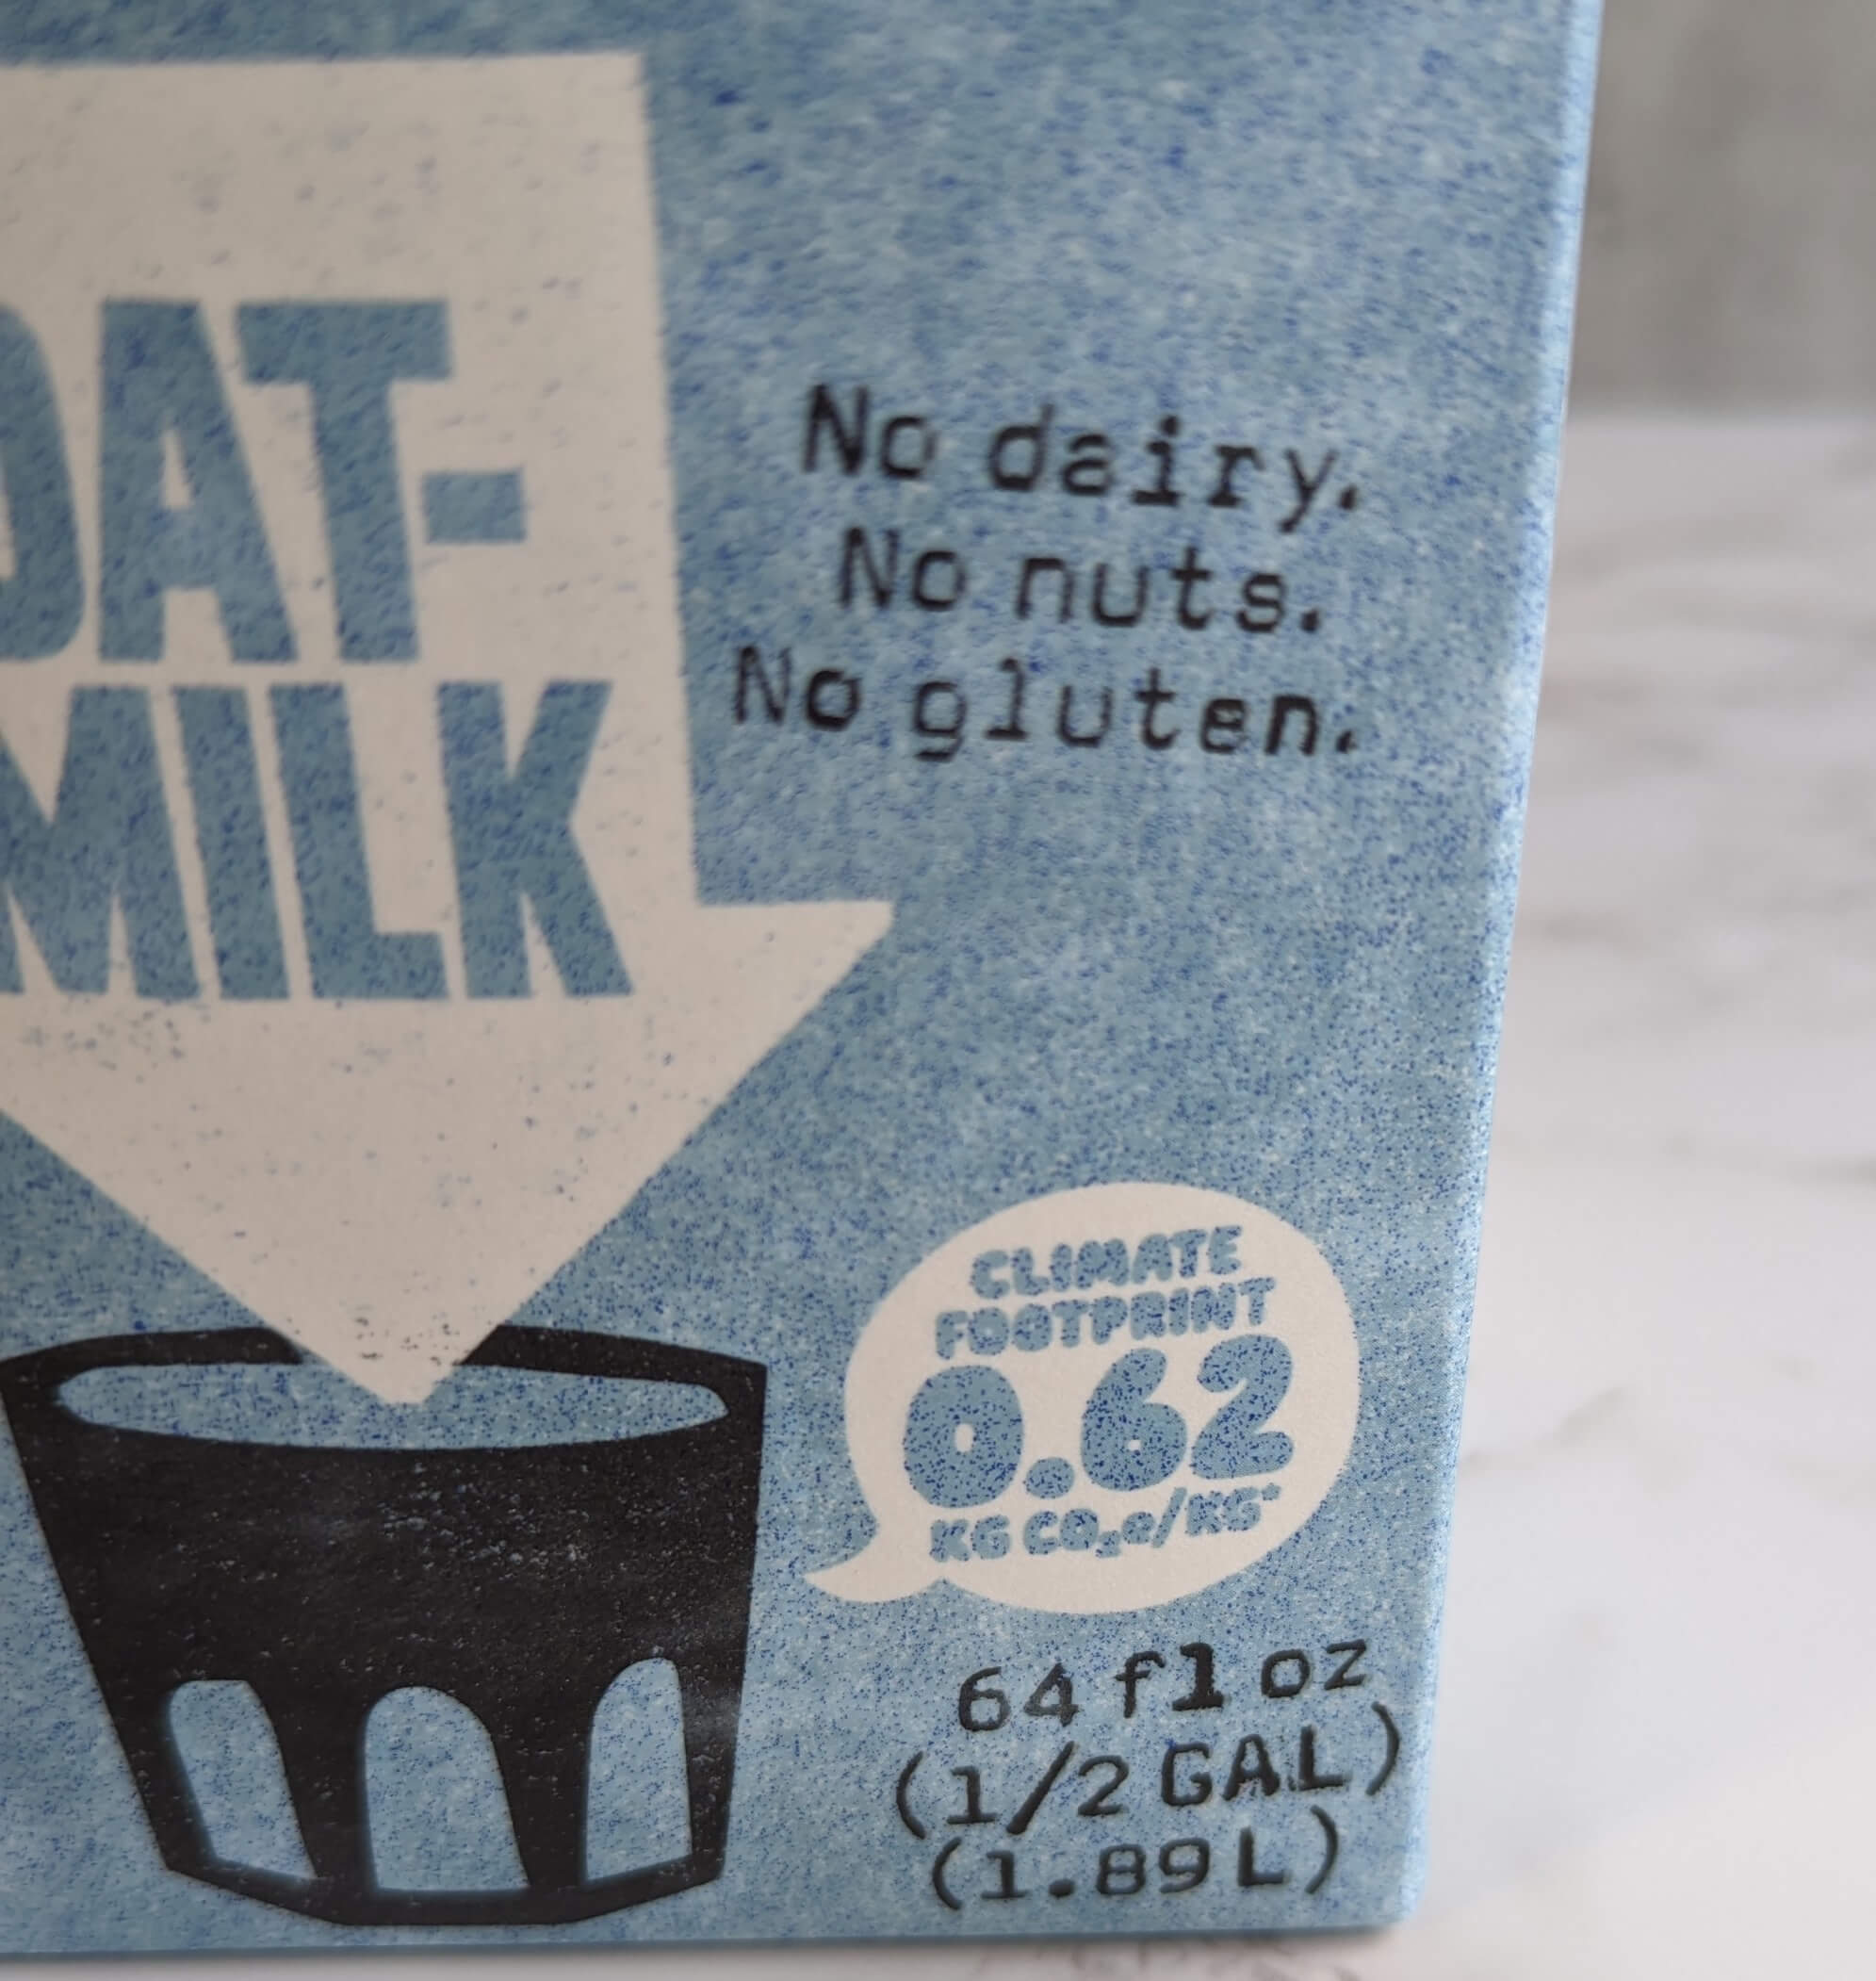 climate footprint note on oatly carton